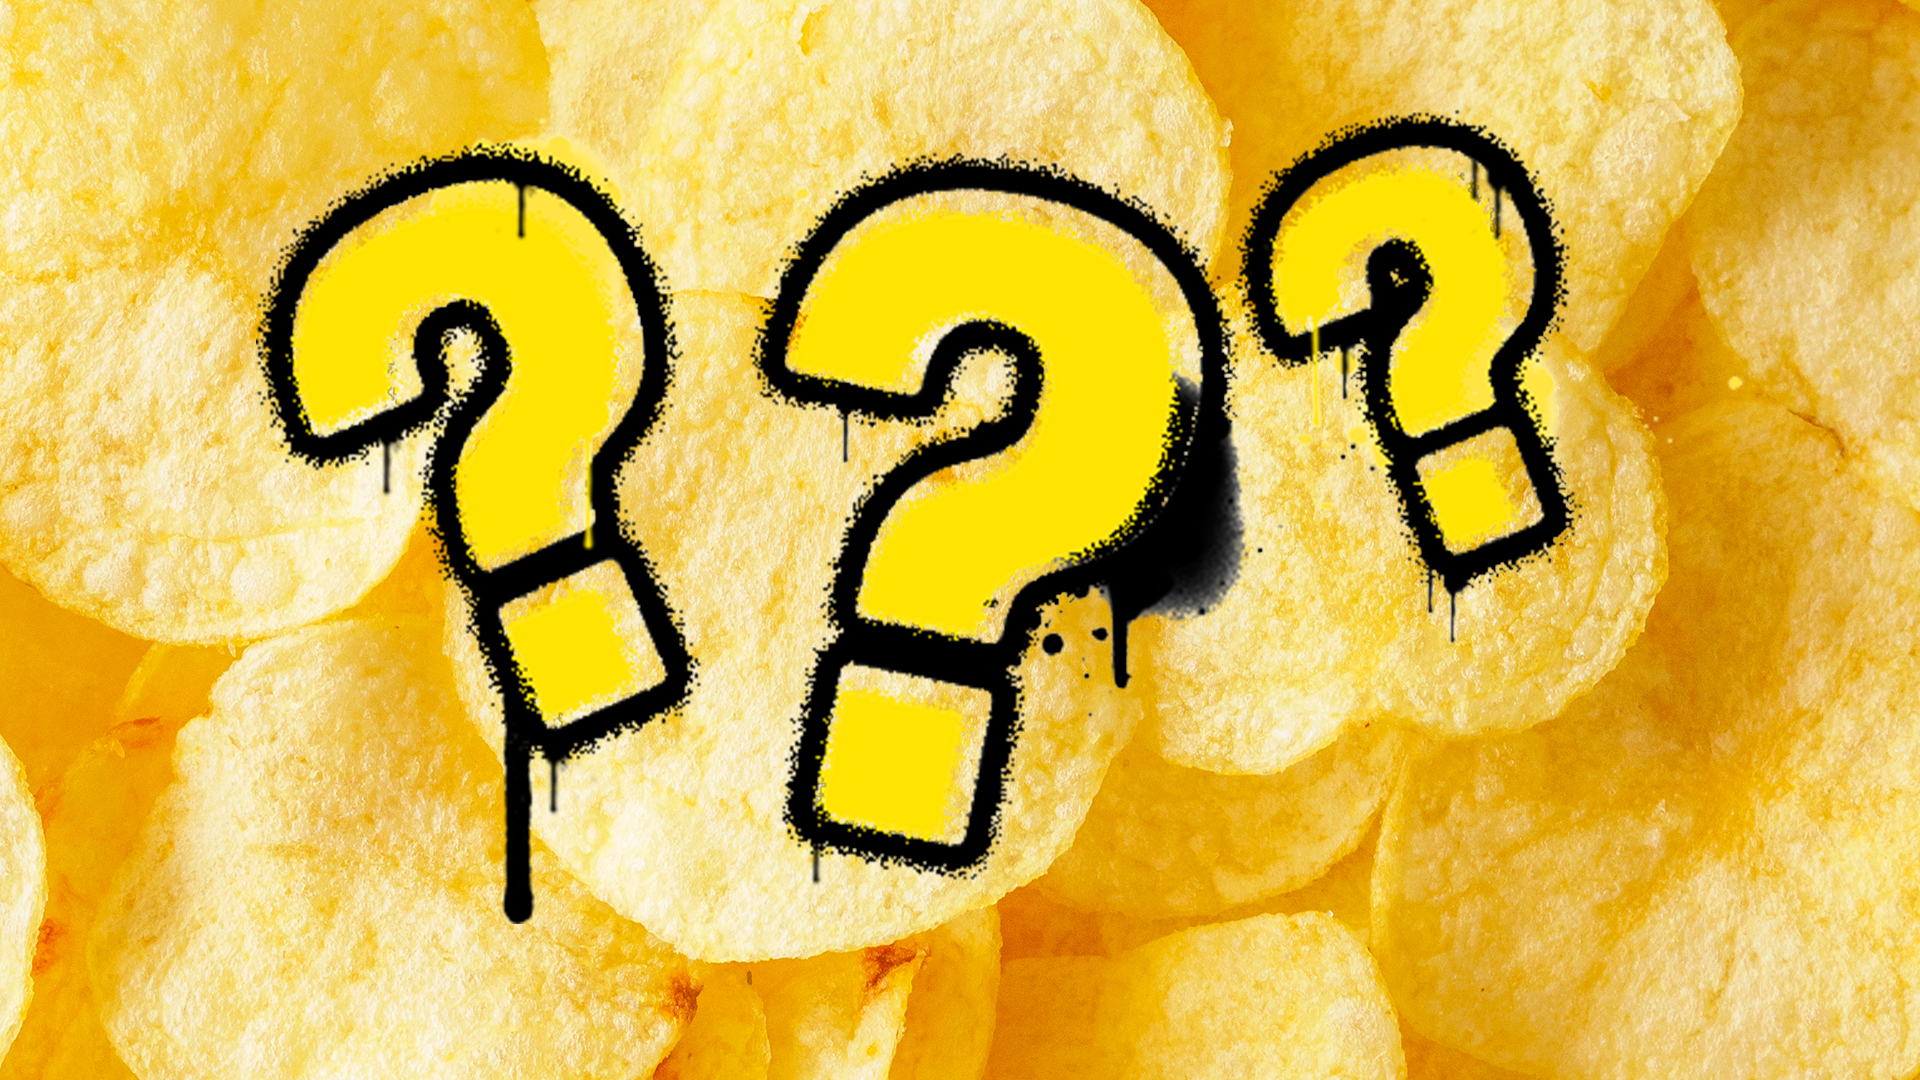 Crisps and question marks